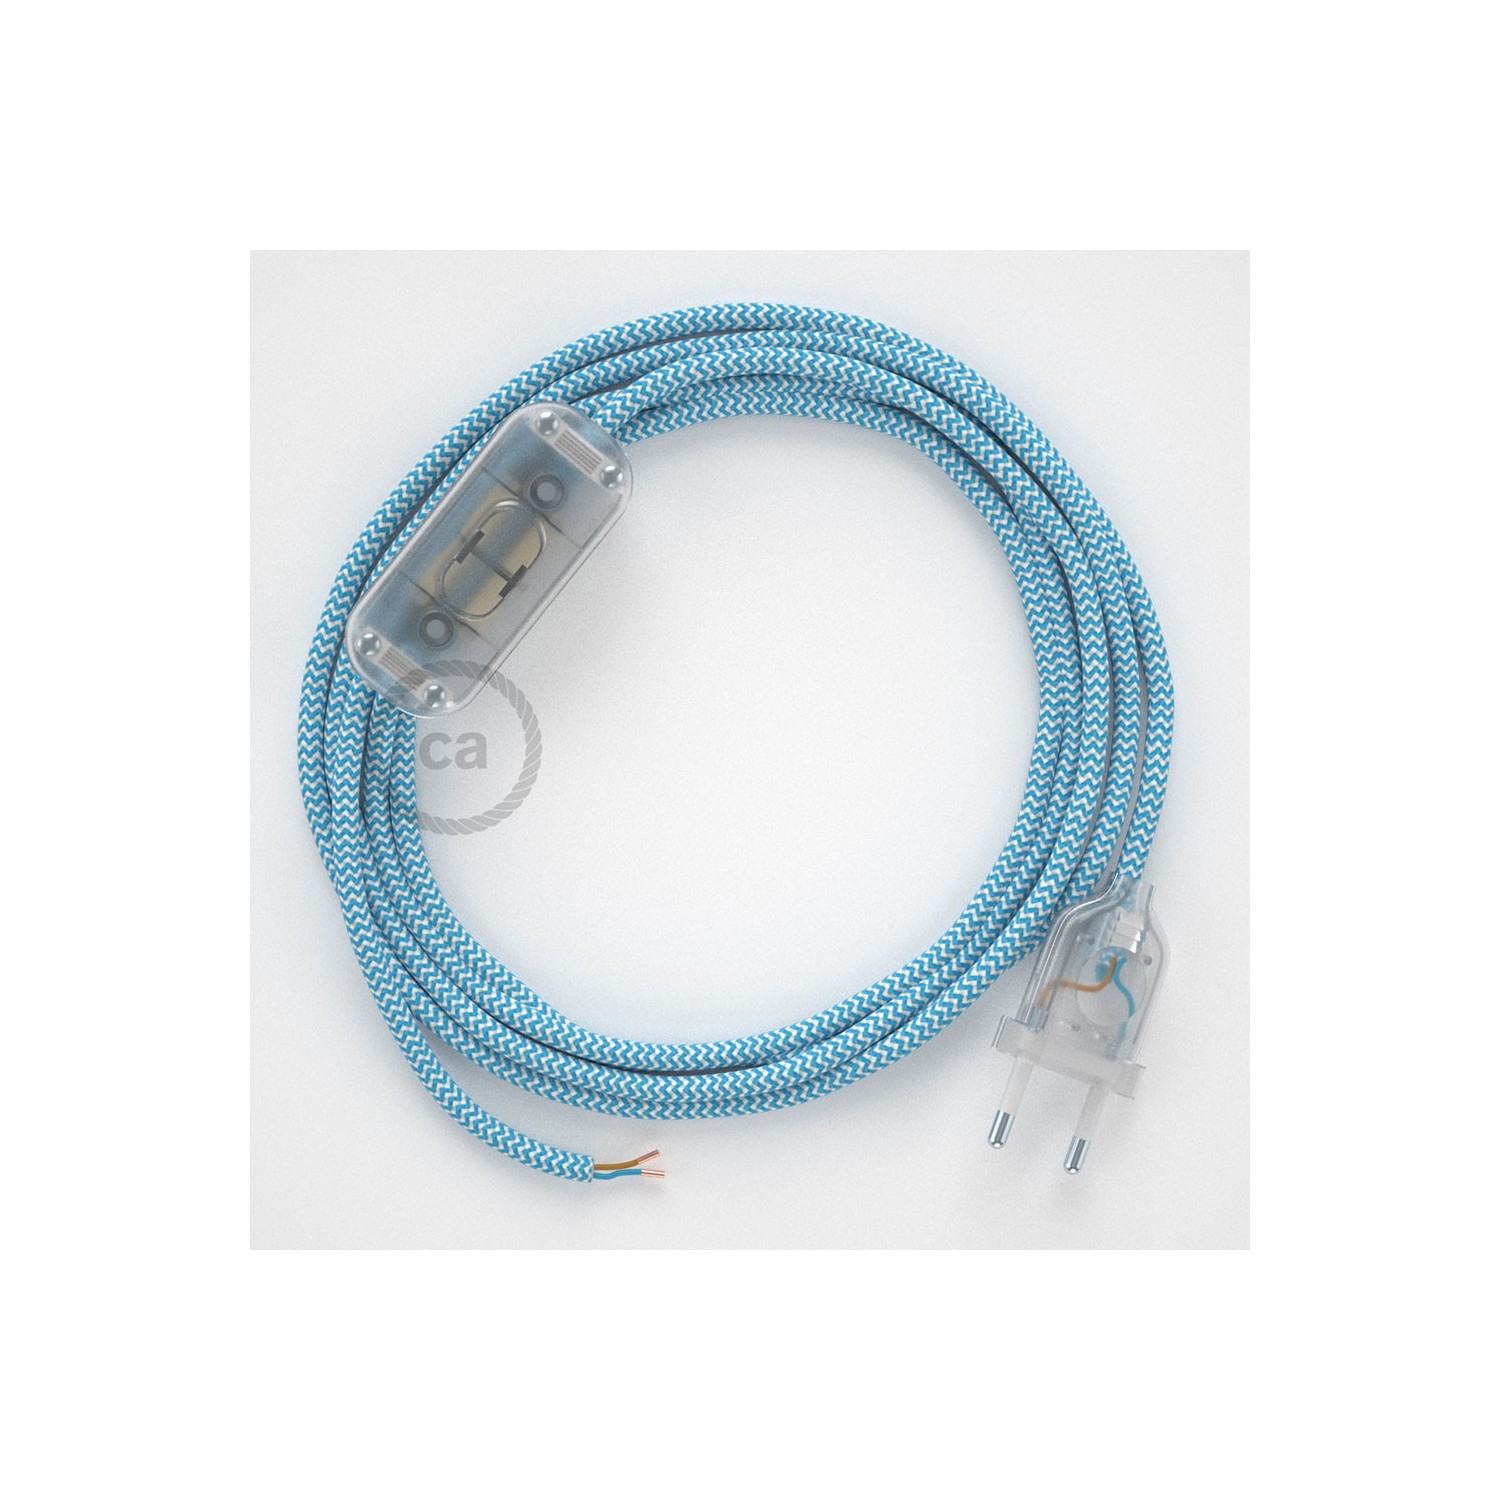 Lamp wiring, RZ11 Turquoise ZigZag Rayon 1,80 m. Choose the colour of the switch and plug.